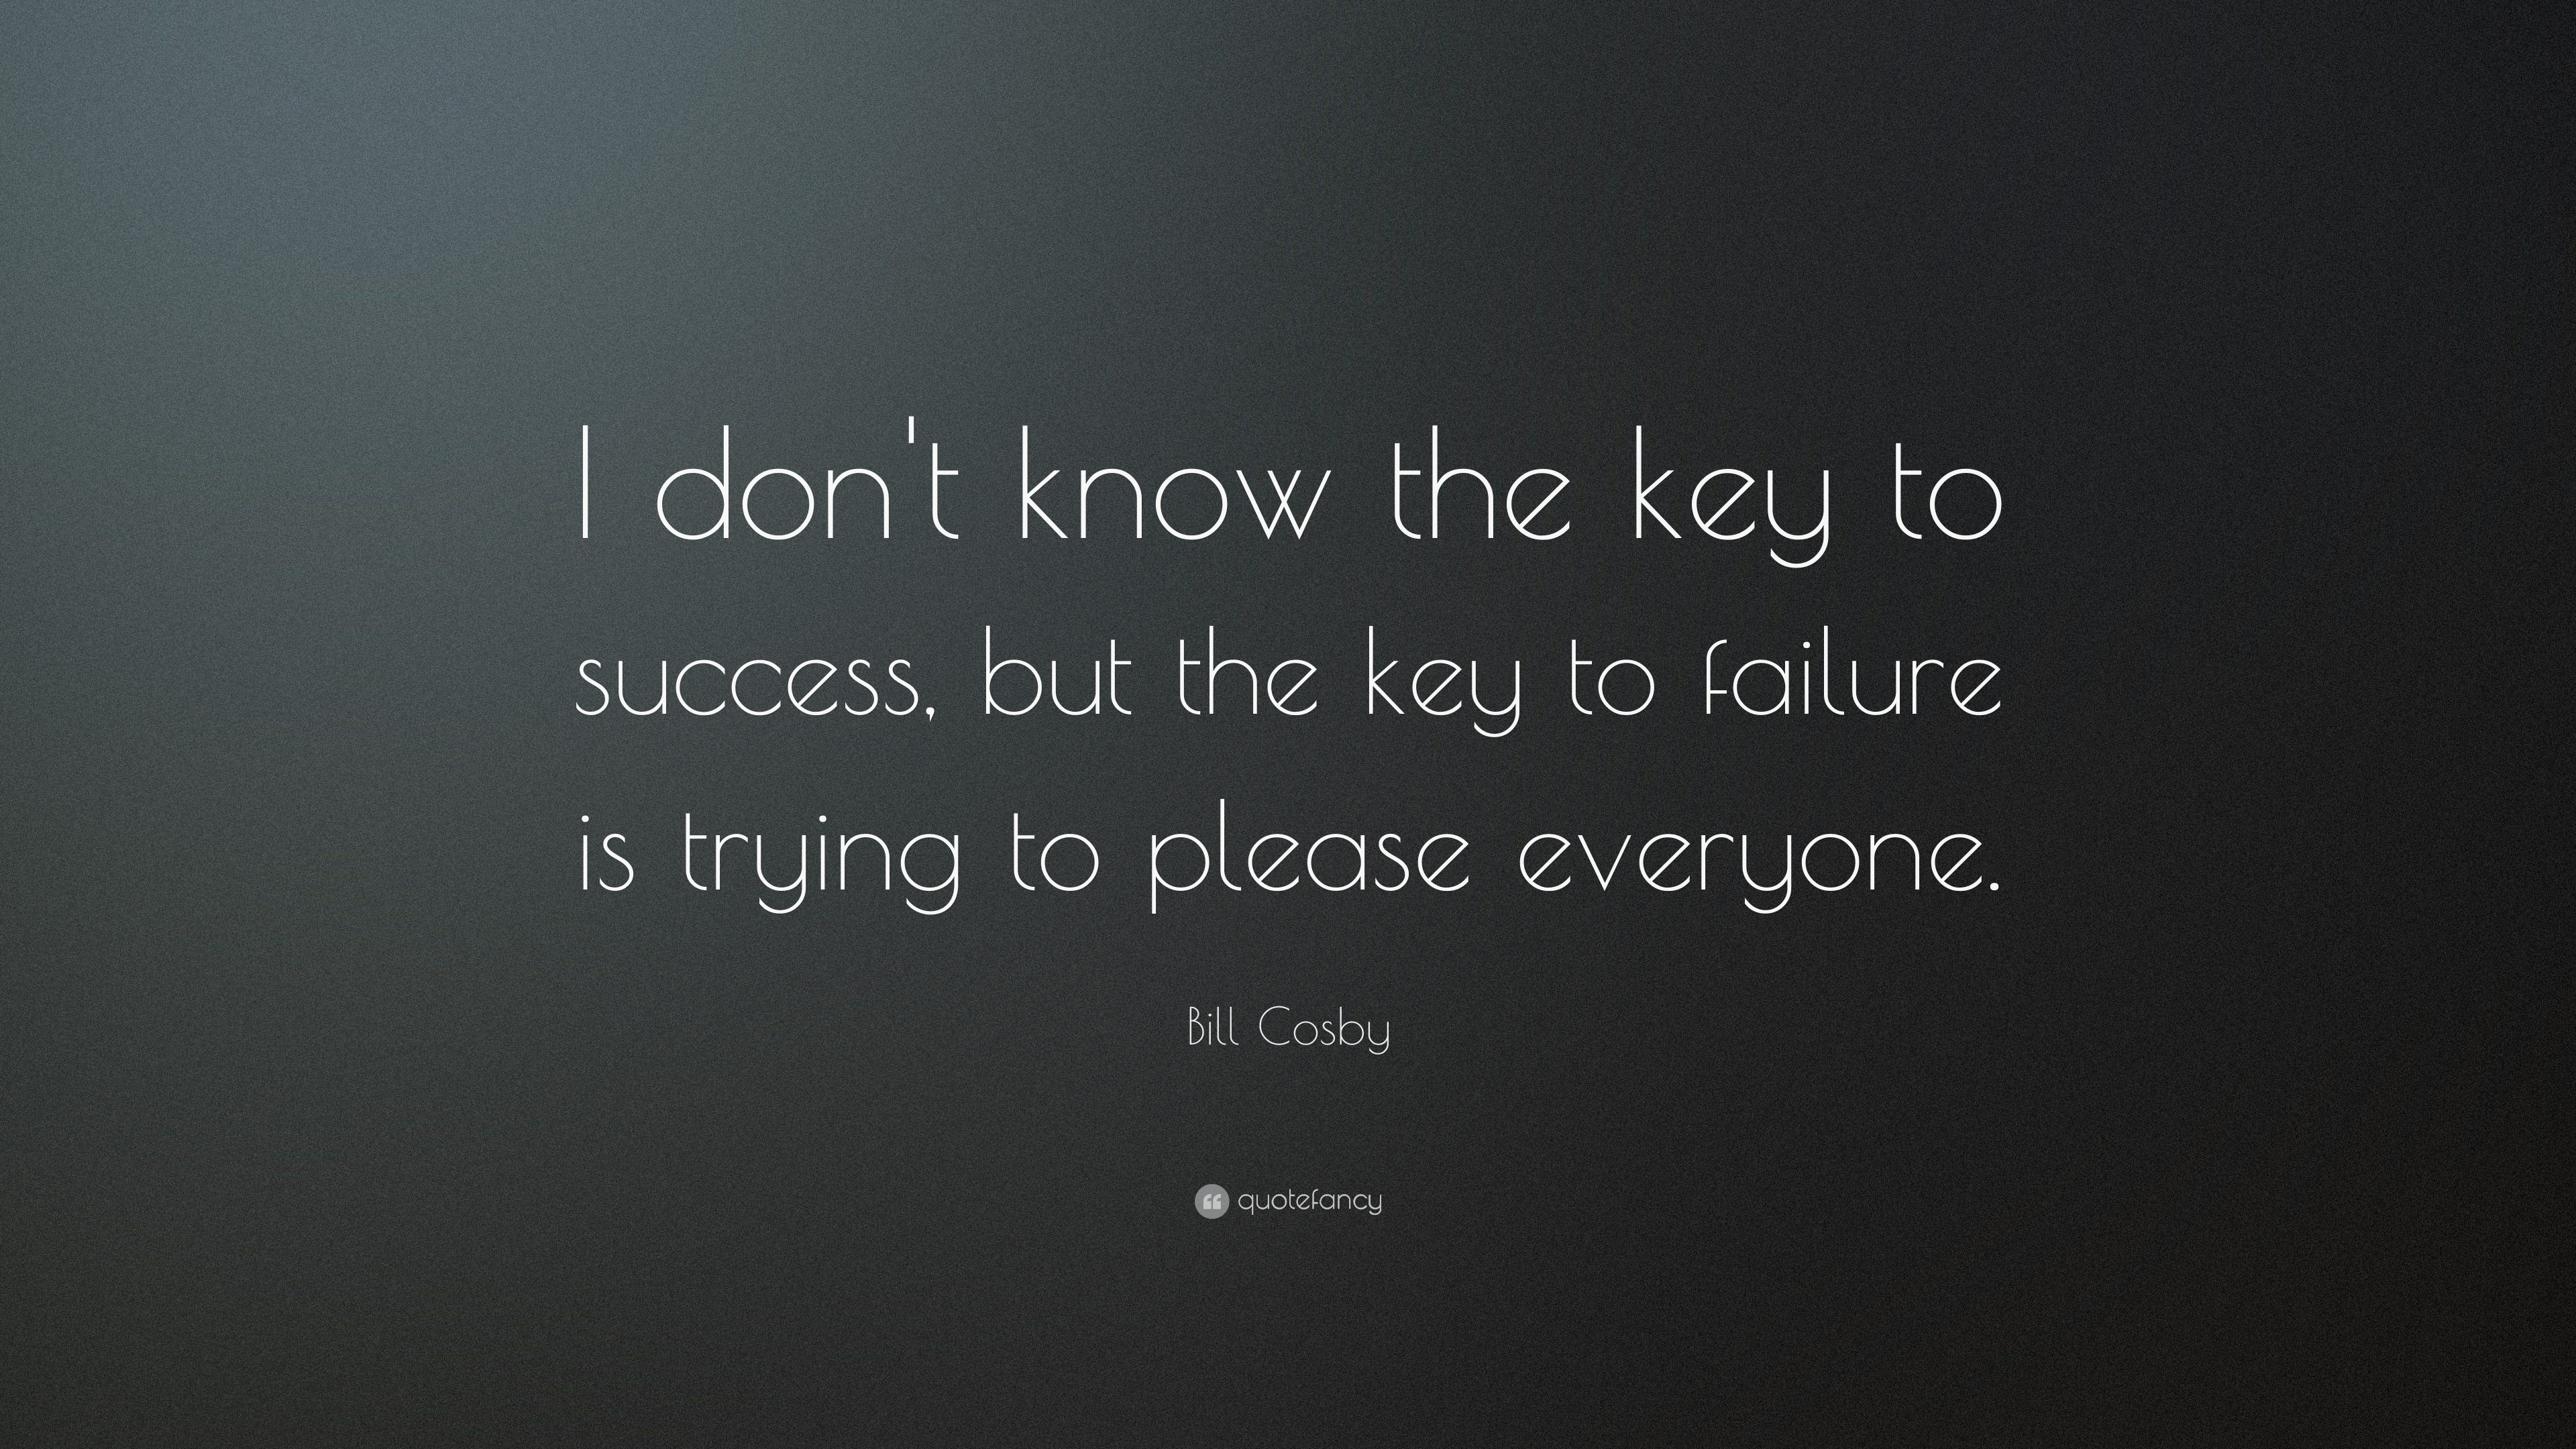 3840x2160 Success Quotes: “I don't know the key to success, but the